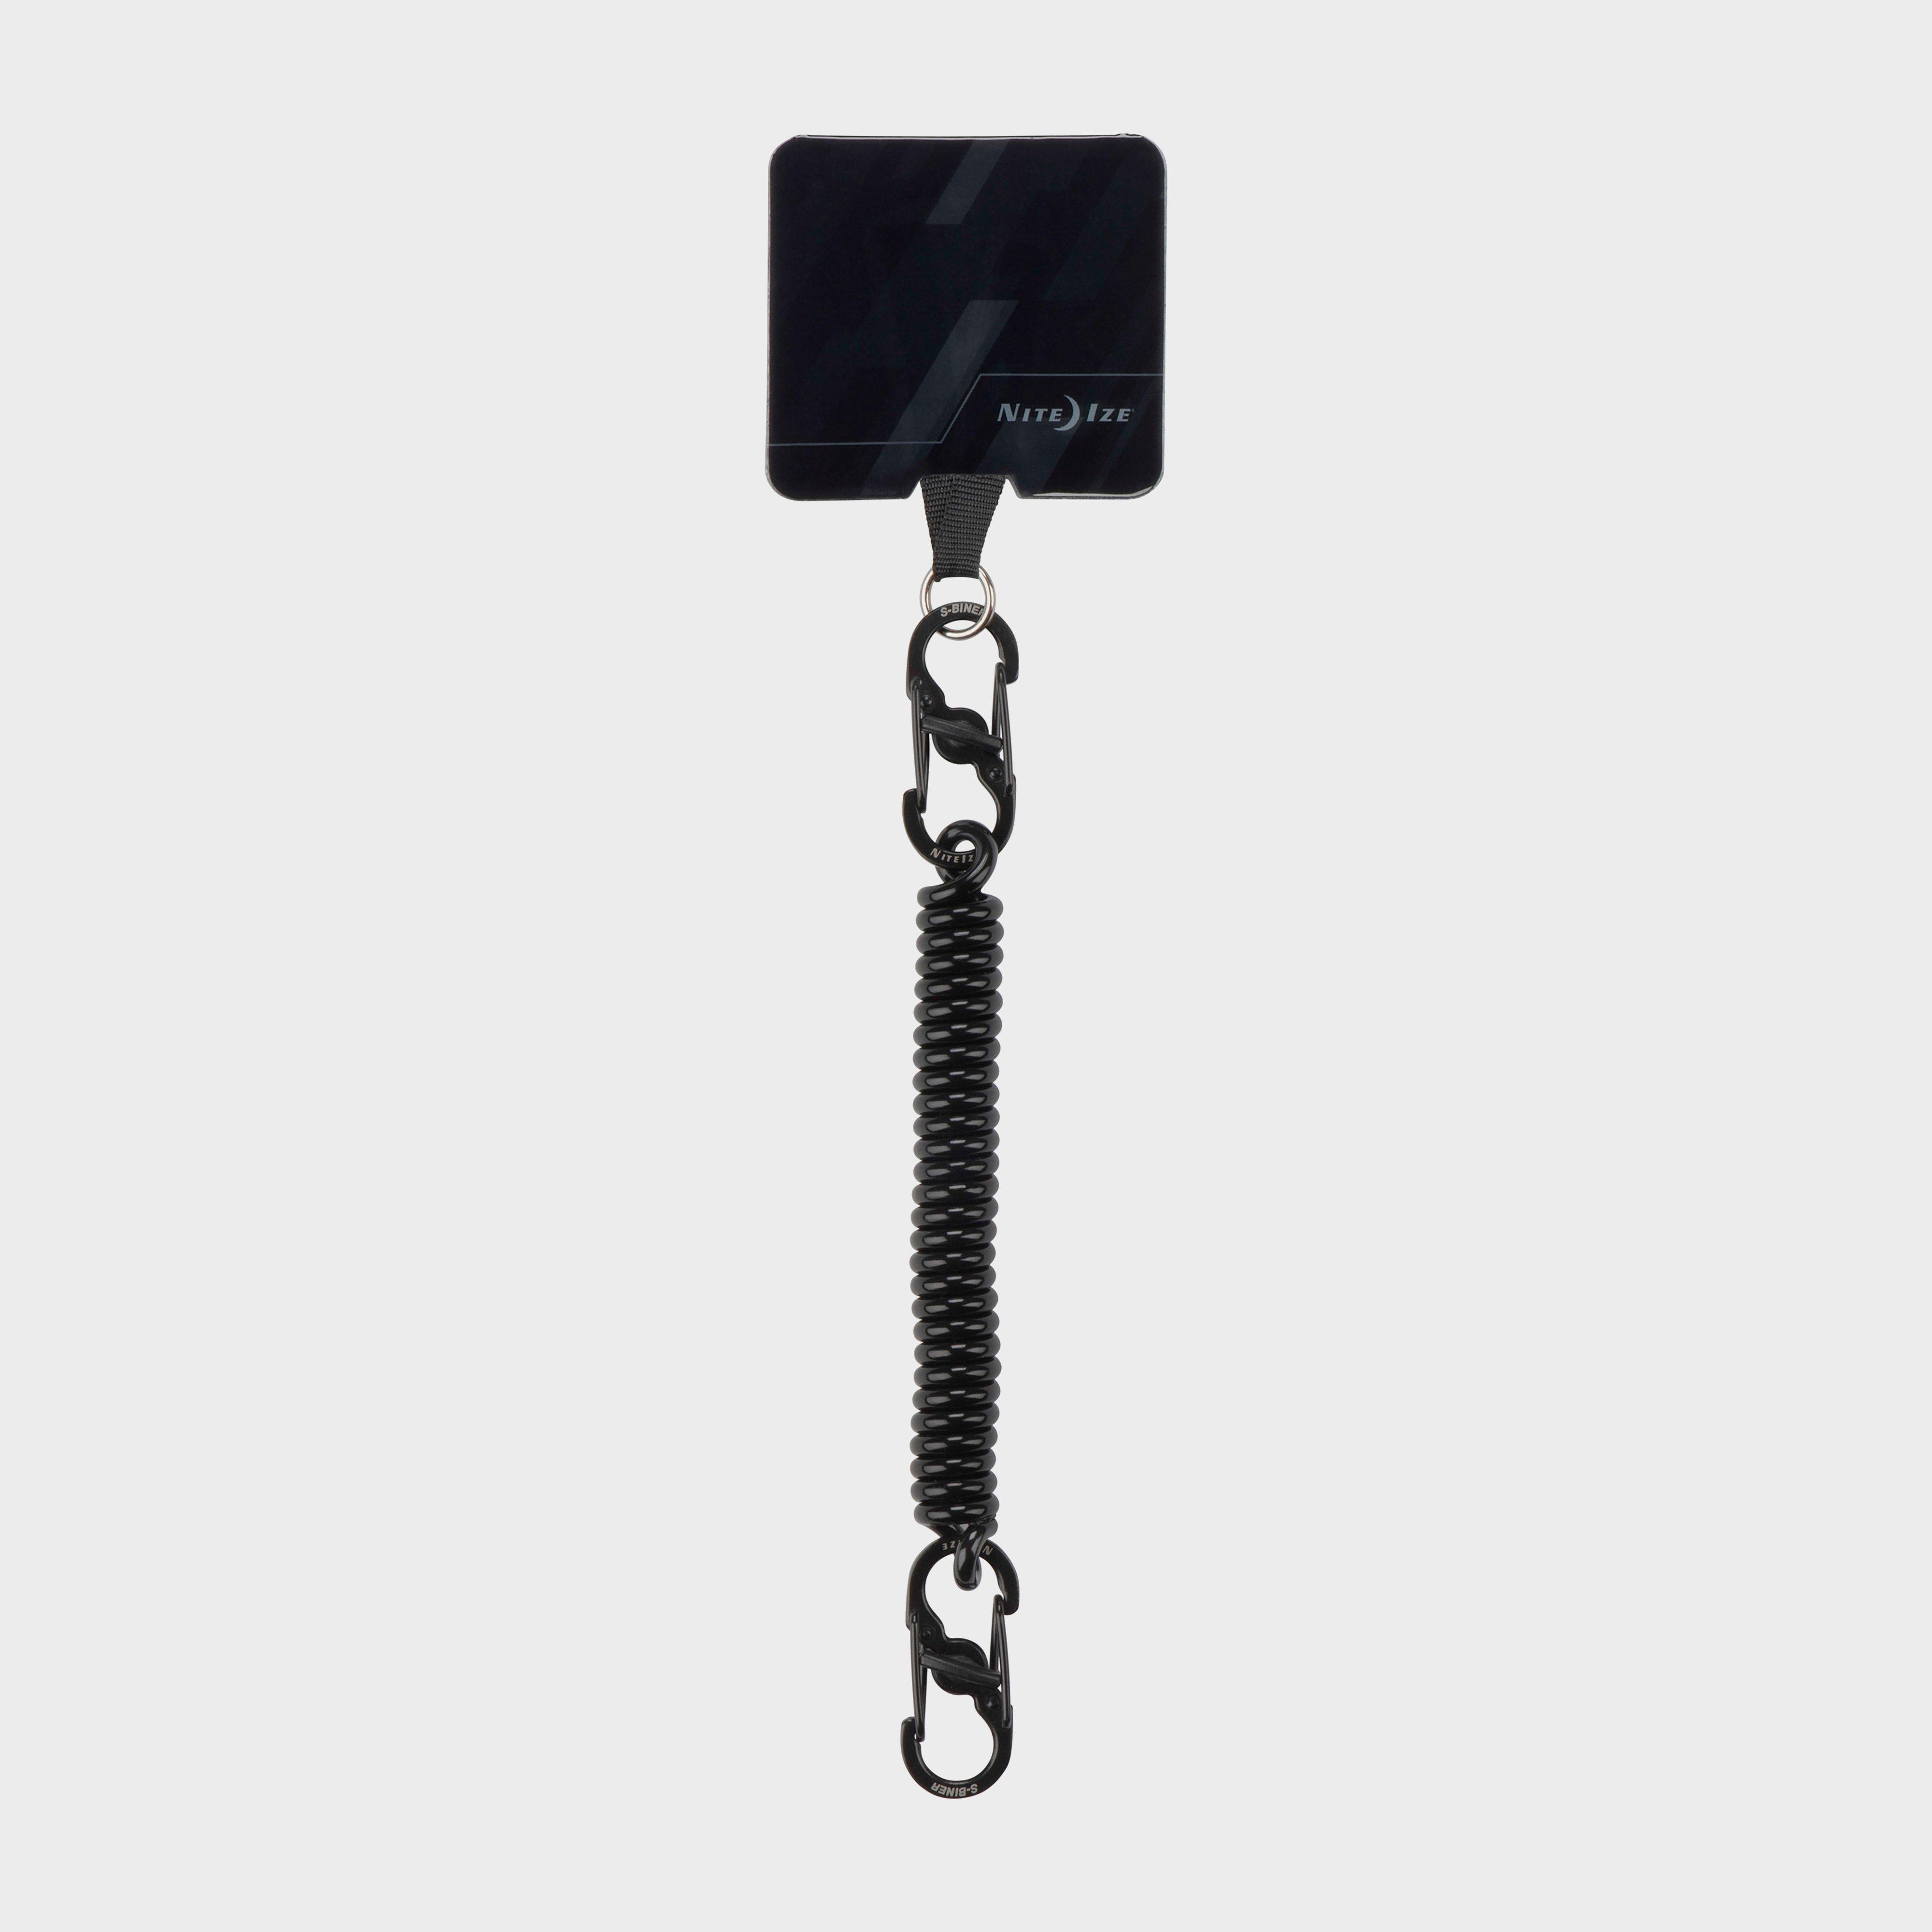 Image of Niteize Hitch Phone Anchor And Tether - Black/Anchor, Black/ANCHOR